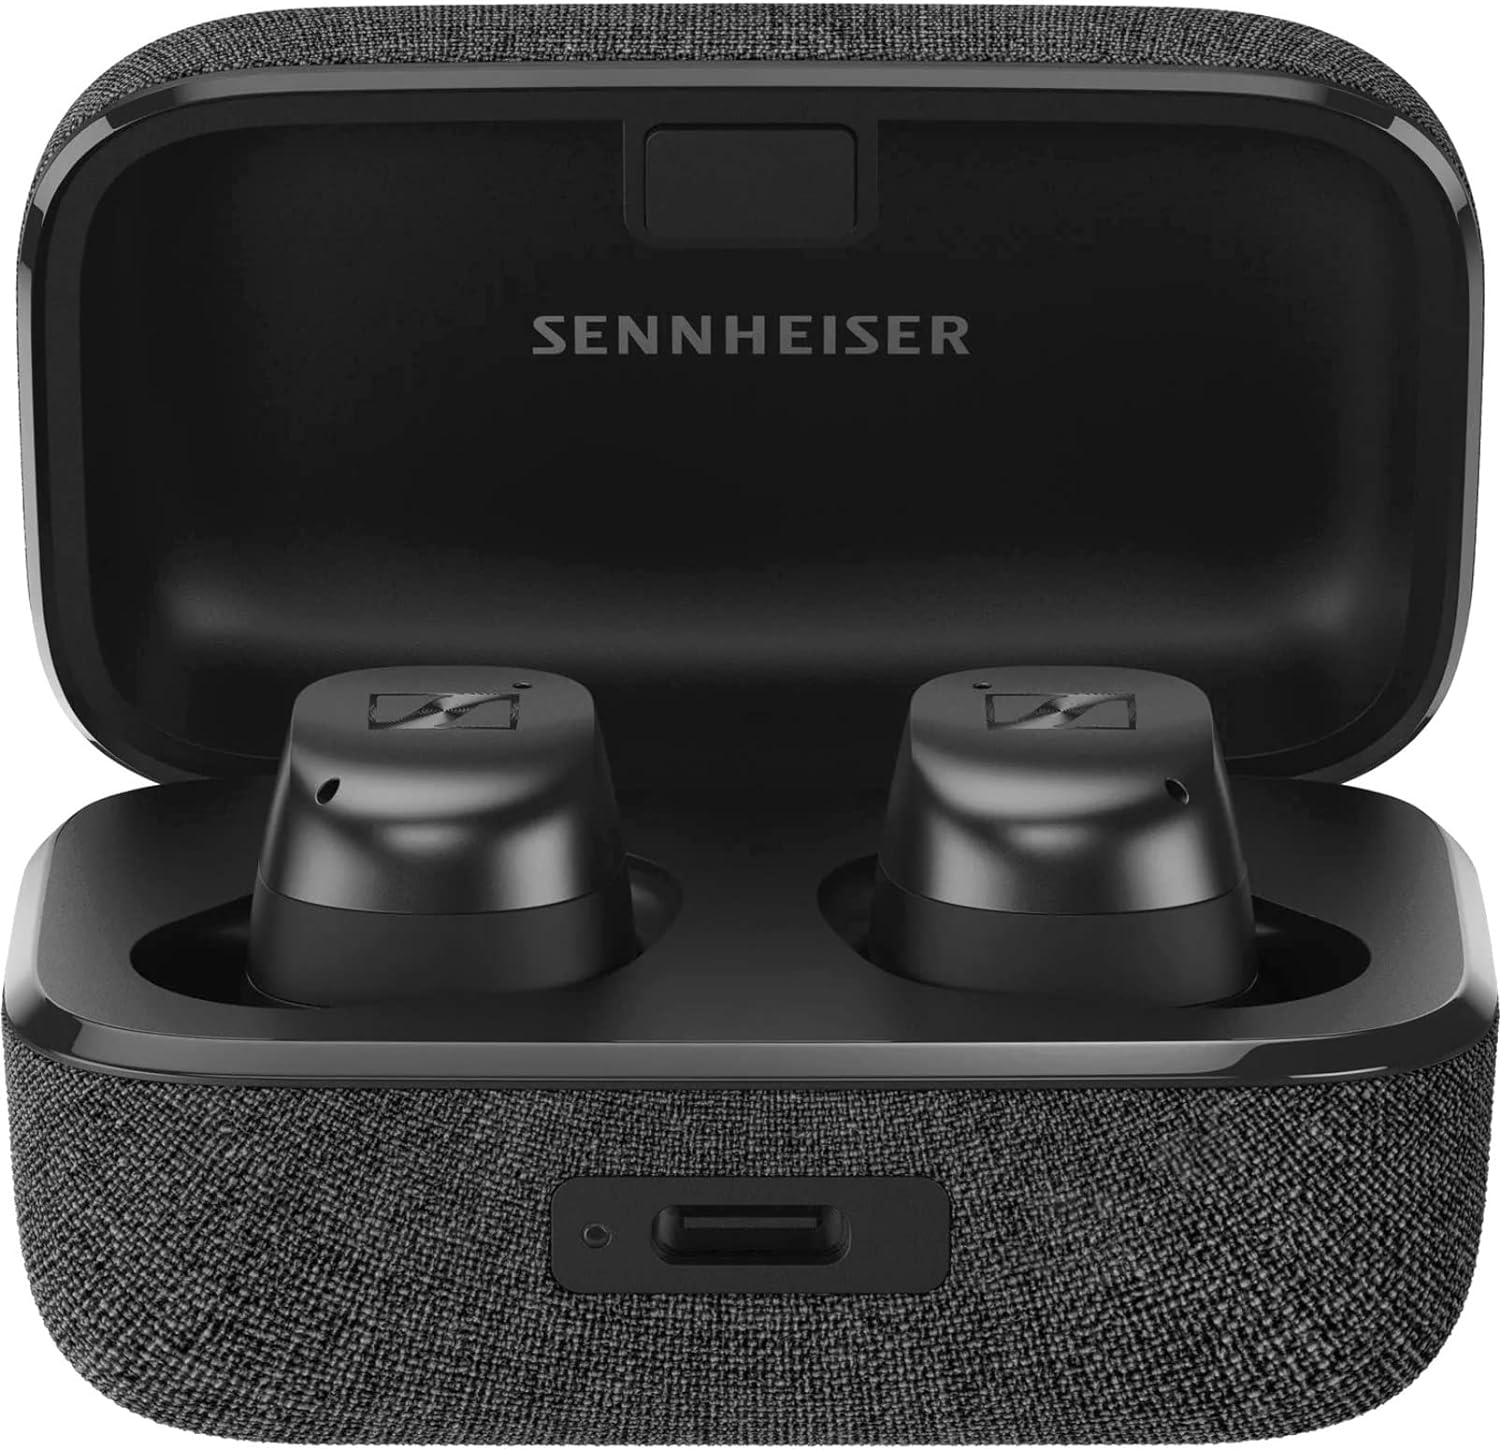 Sennheiser Momentum 3 Earbuds Review: A Mixed Bag of Sound Quality and Comfort